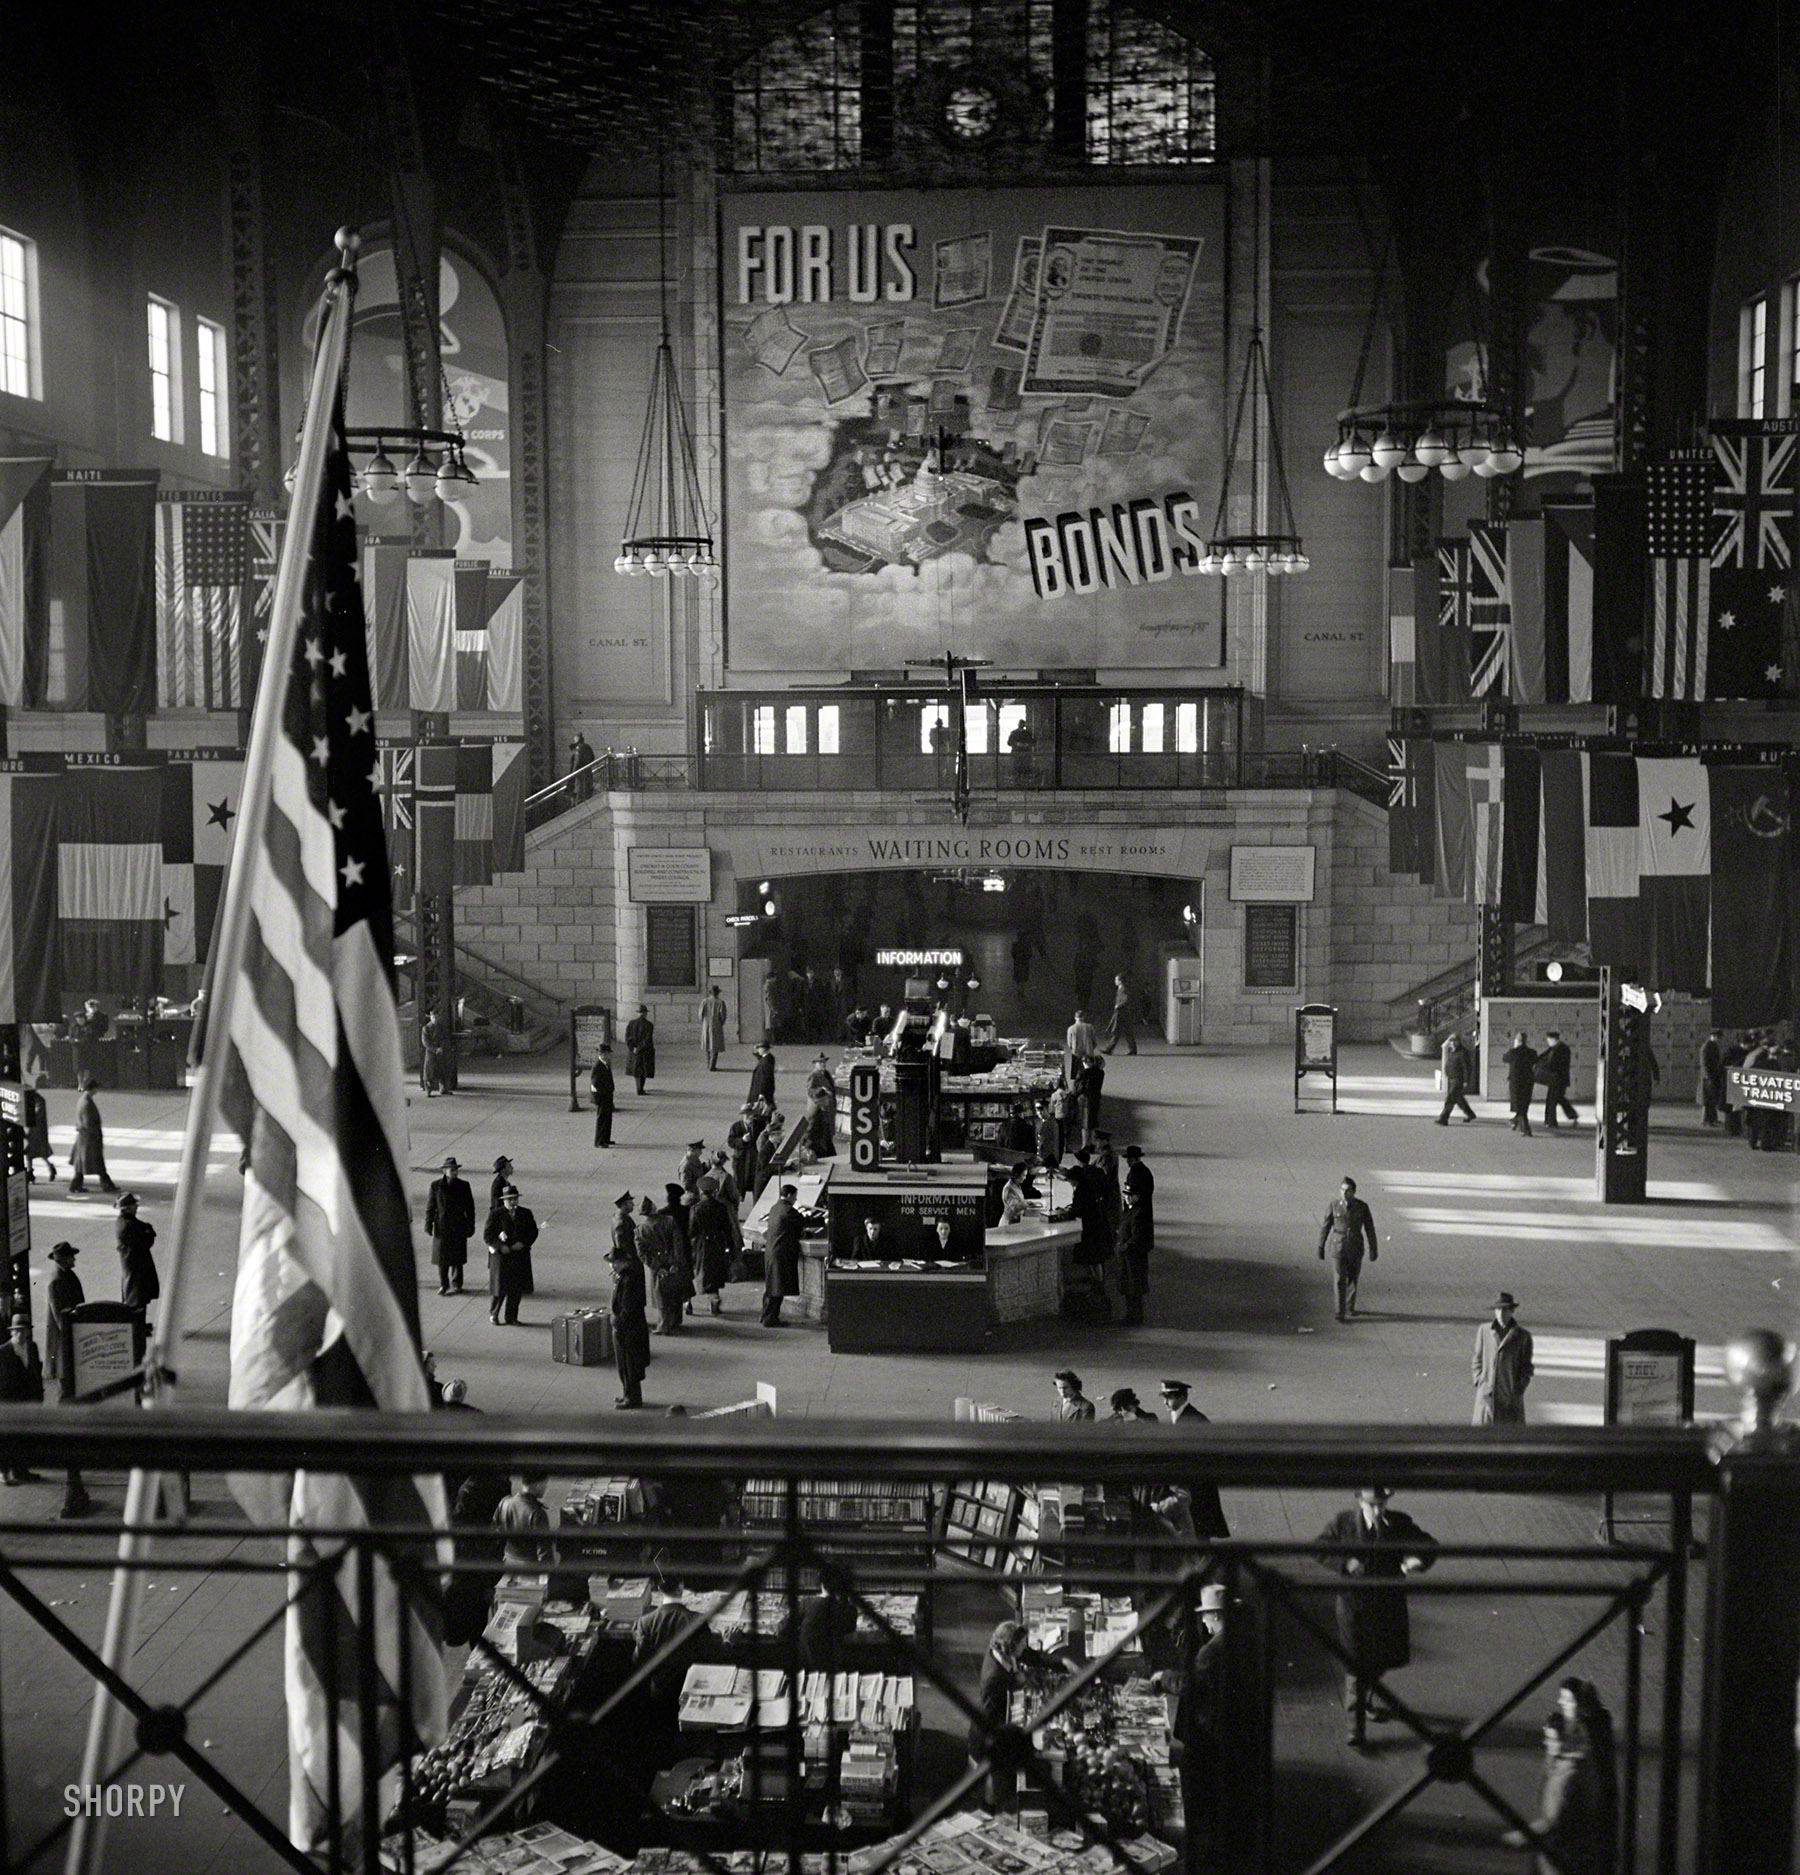 &nbsp; &nbsp; &nbsp; Prequel to the poster seen here.
January 1943. "Chicago, Illinois. Union Station train concourse." Medium-format negative by Jack Delano for the Office of War Information. View full size.